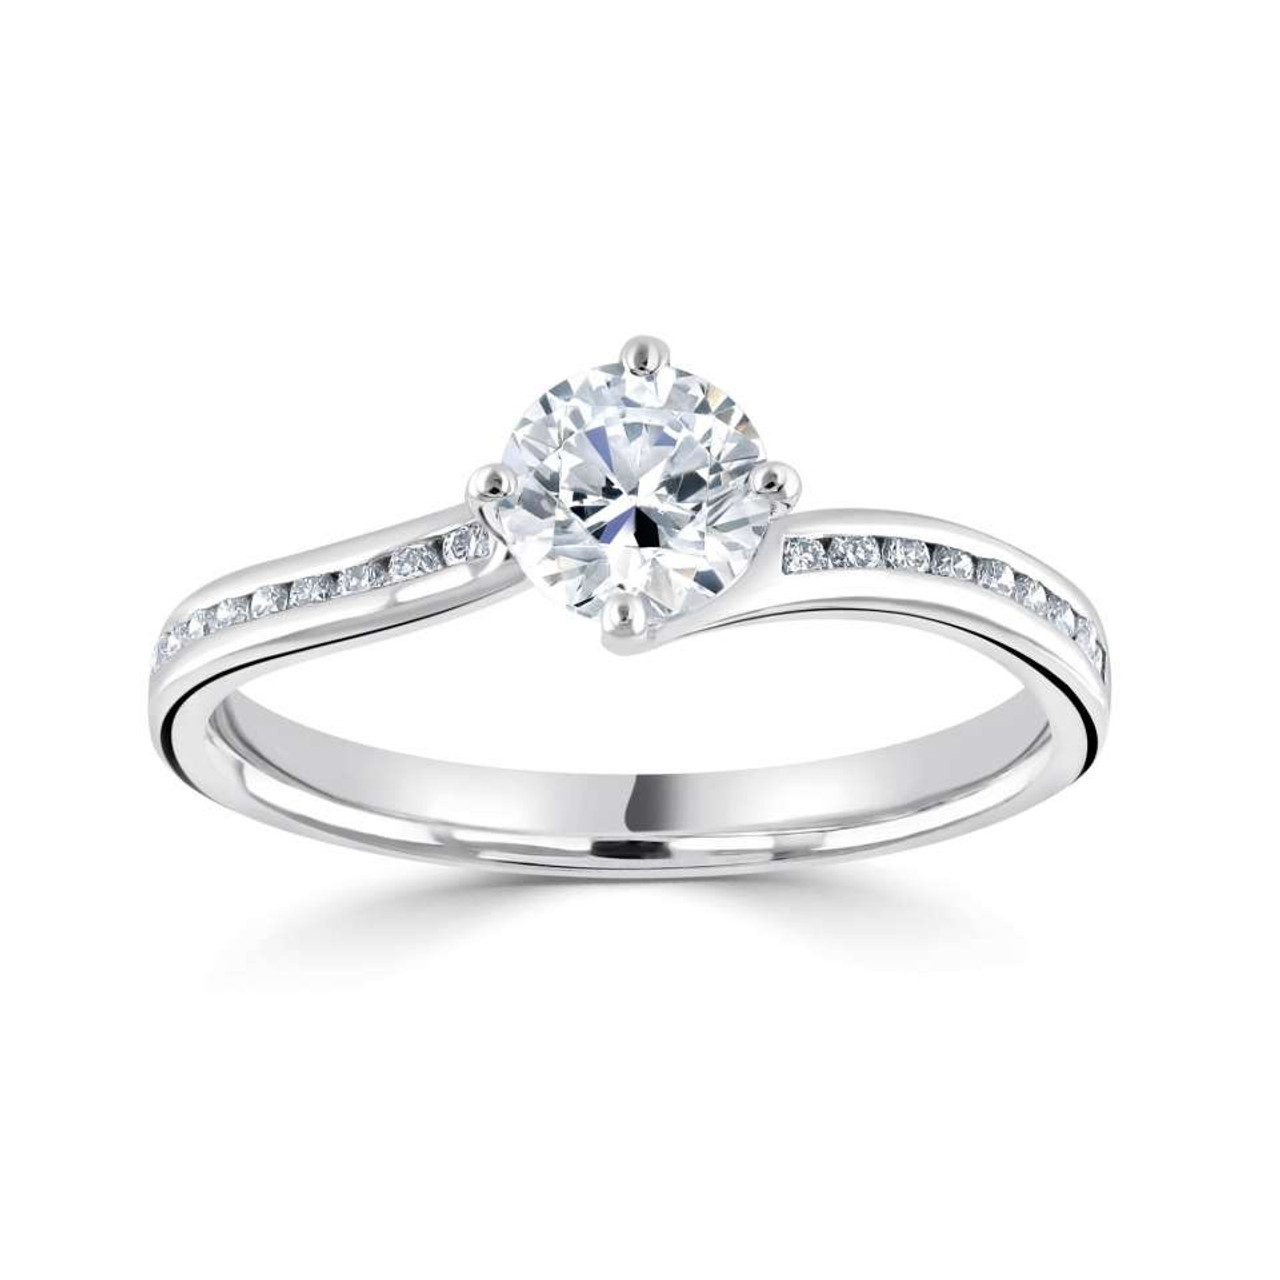 Round twist Solitaire Engagement ring with channel set Diamond shoulders